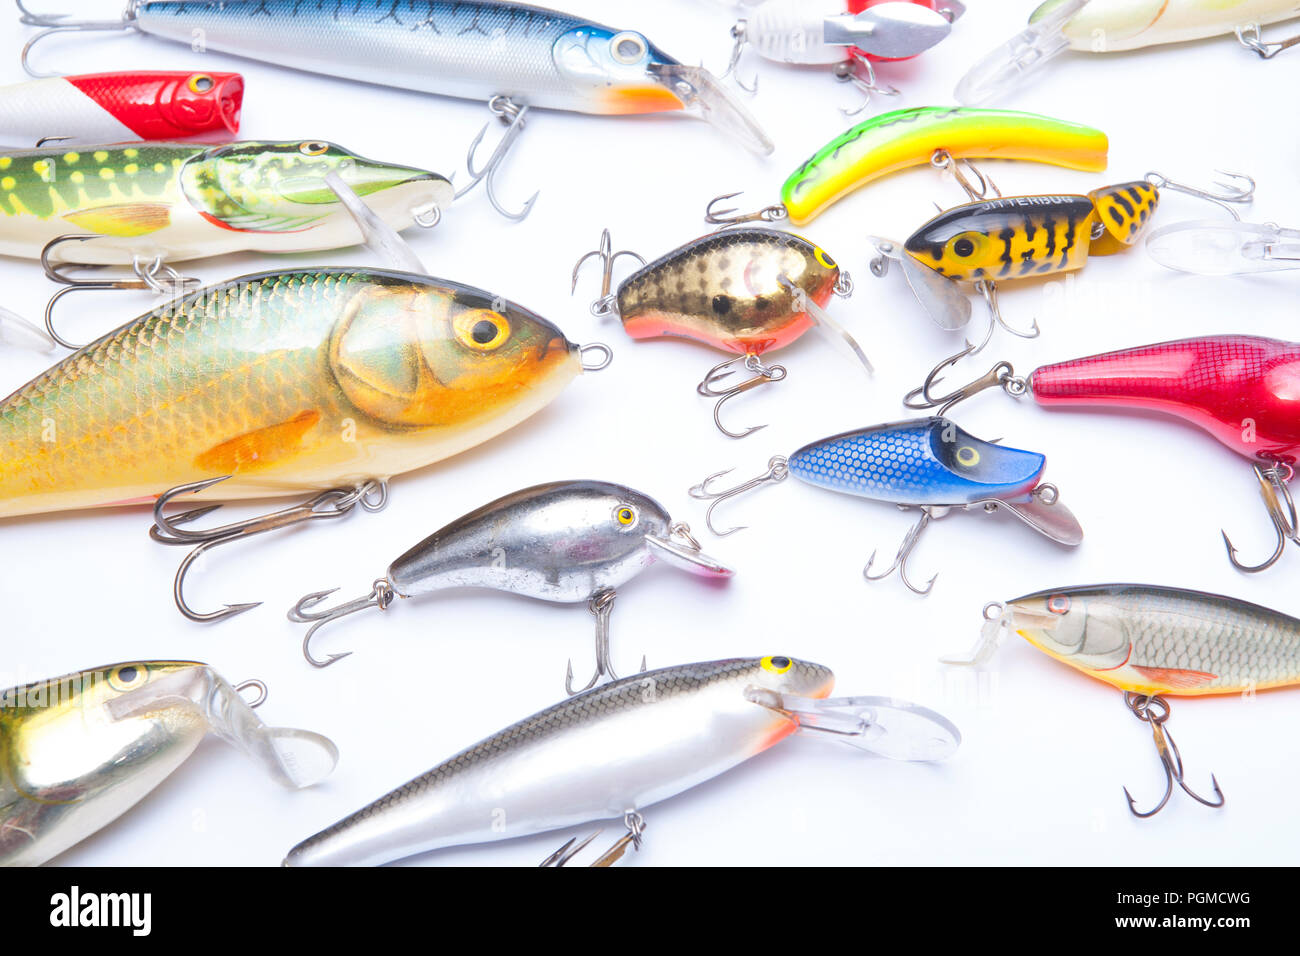 A selection of mostly modern fishing lures, also known as plugs, equipped with treble hooks and designed for catching predatory fish. Fishing plugs ar Stock Photo